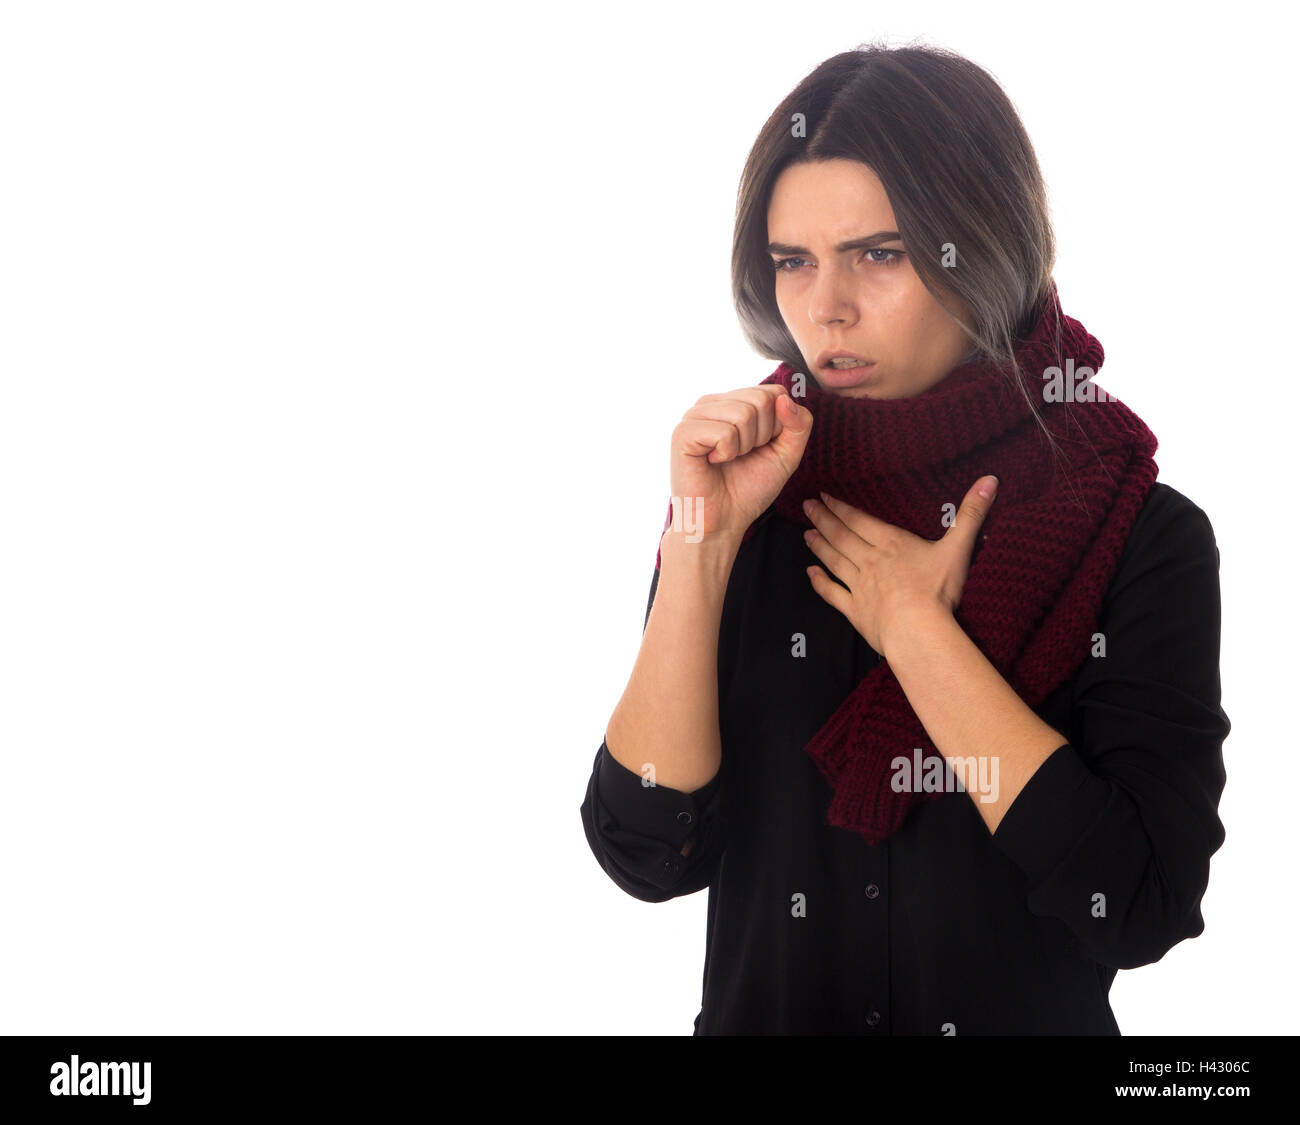 Sick woman with scarf coughing Stock Photo